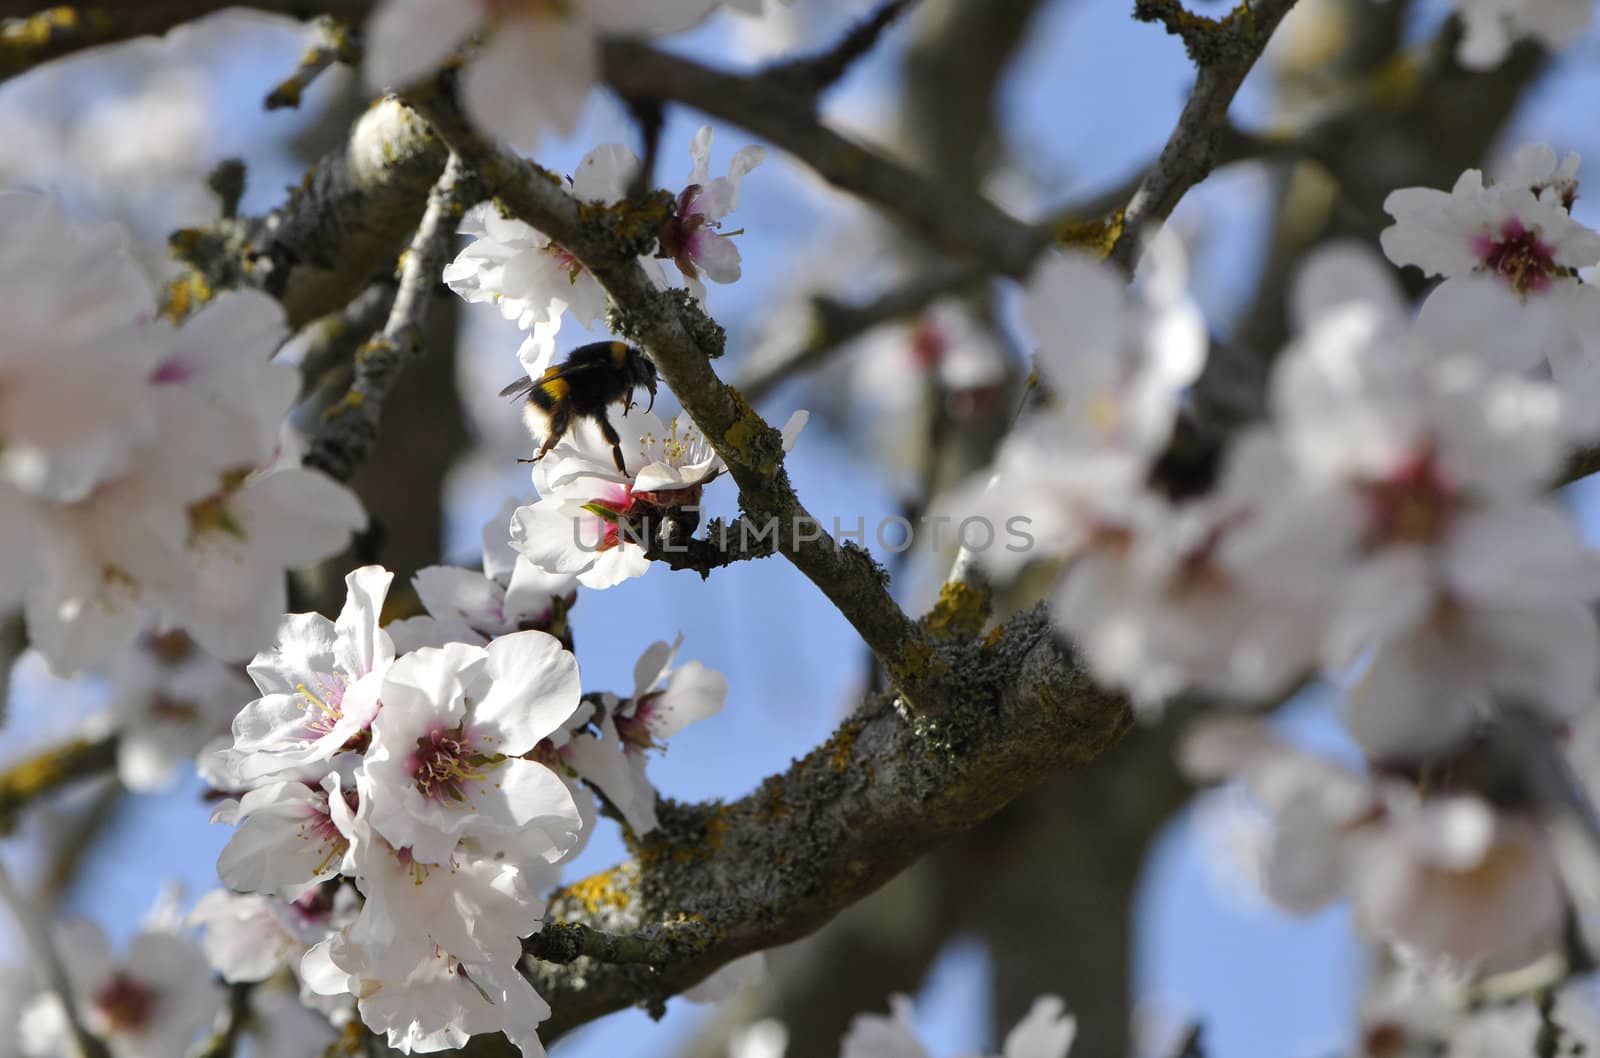 Many White Flowers on a tree with a Bumblebee